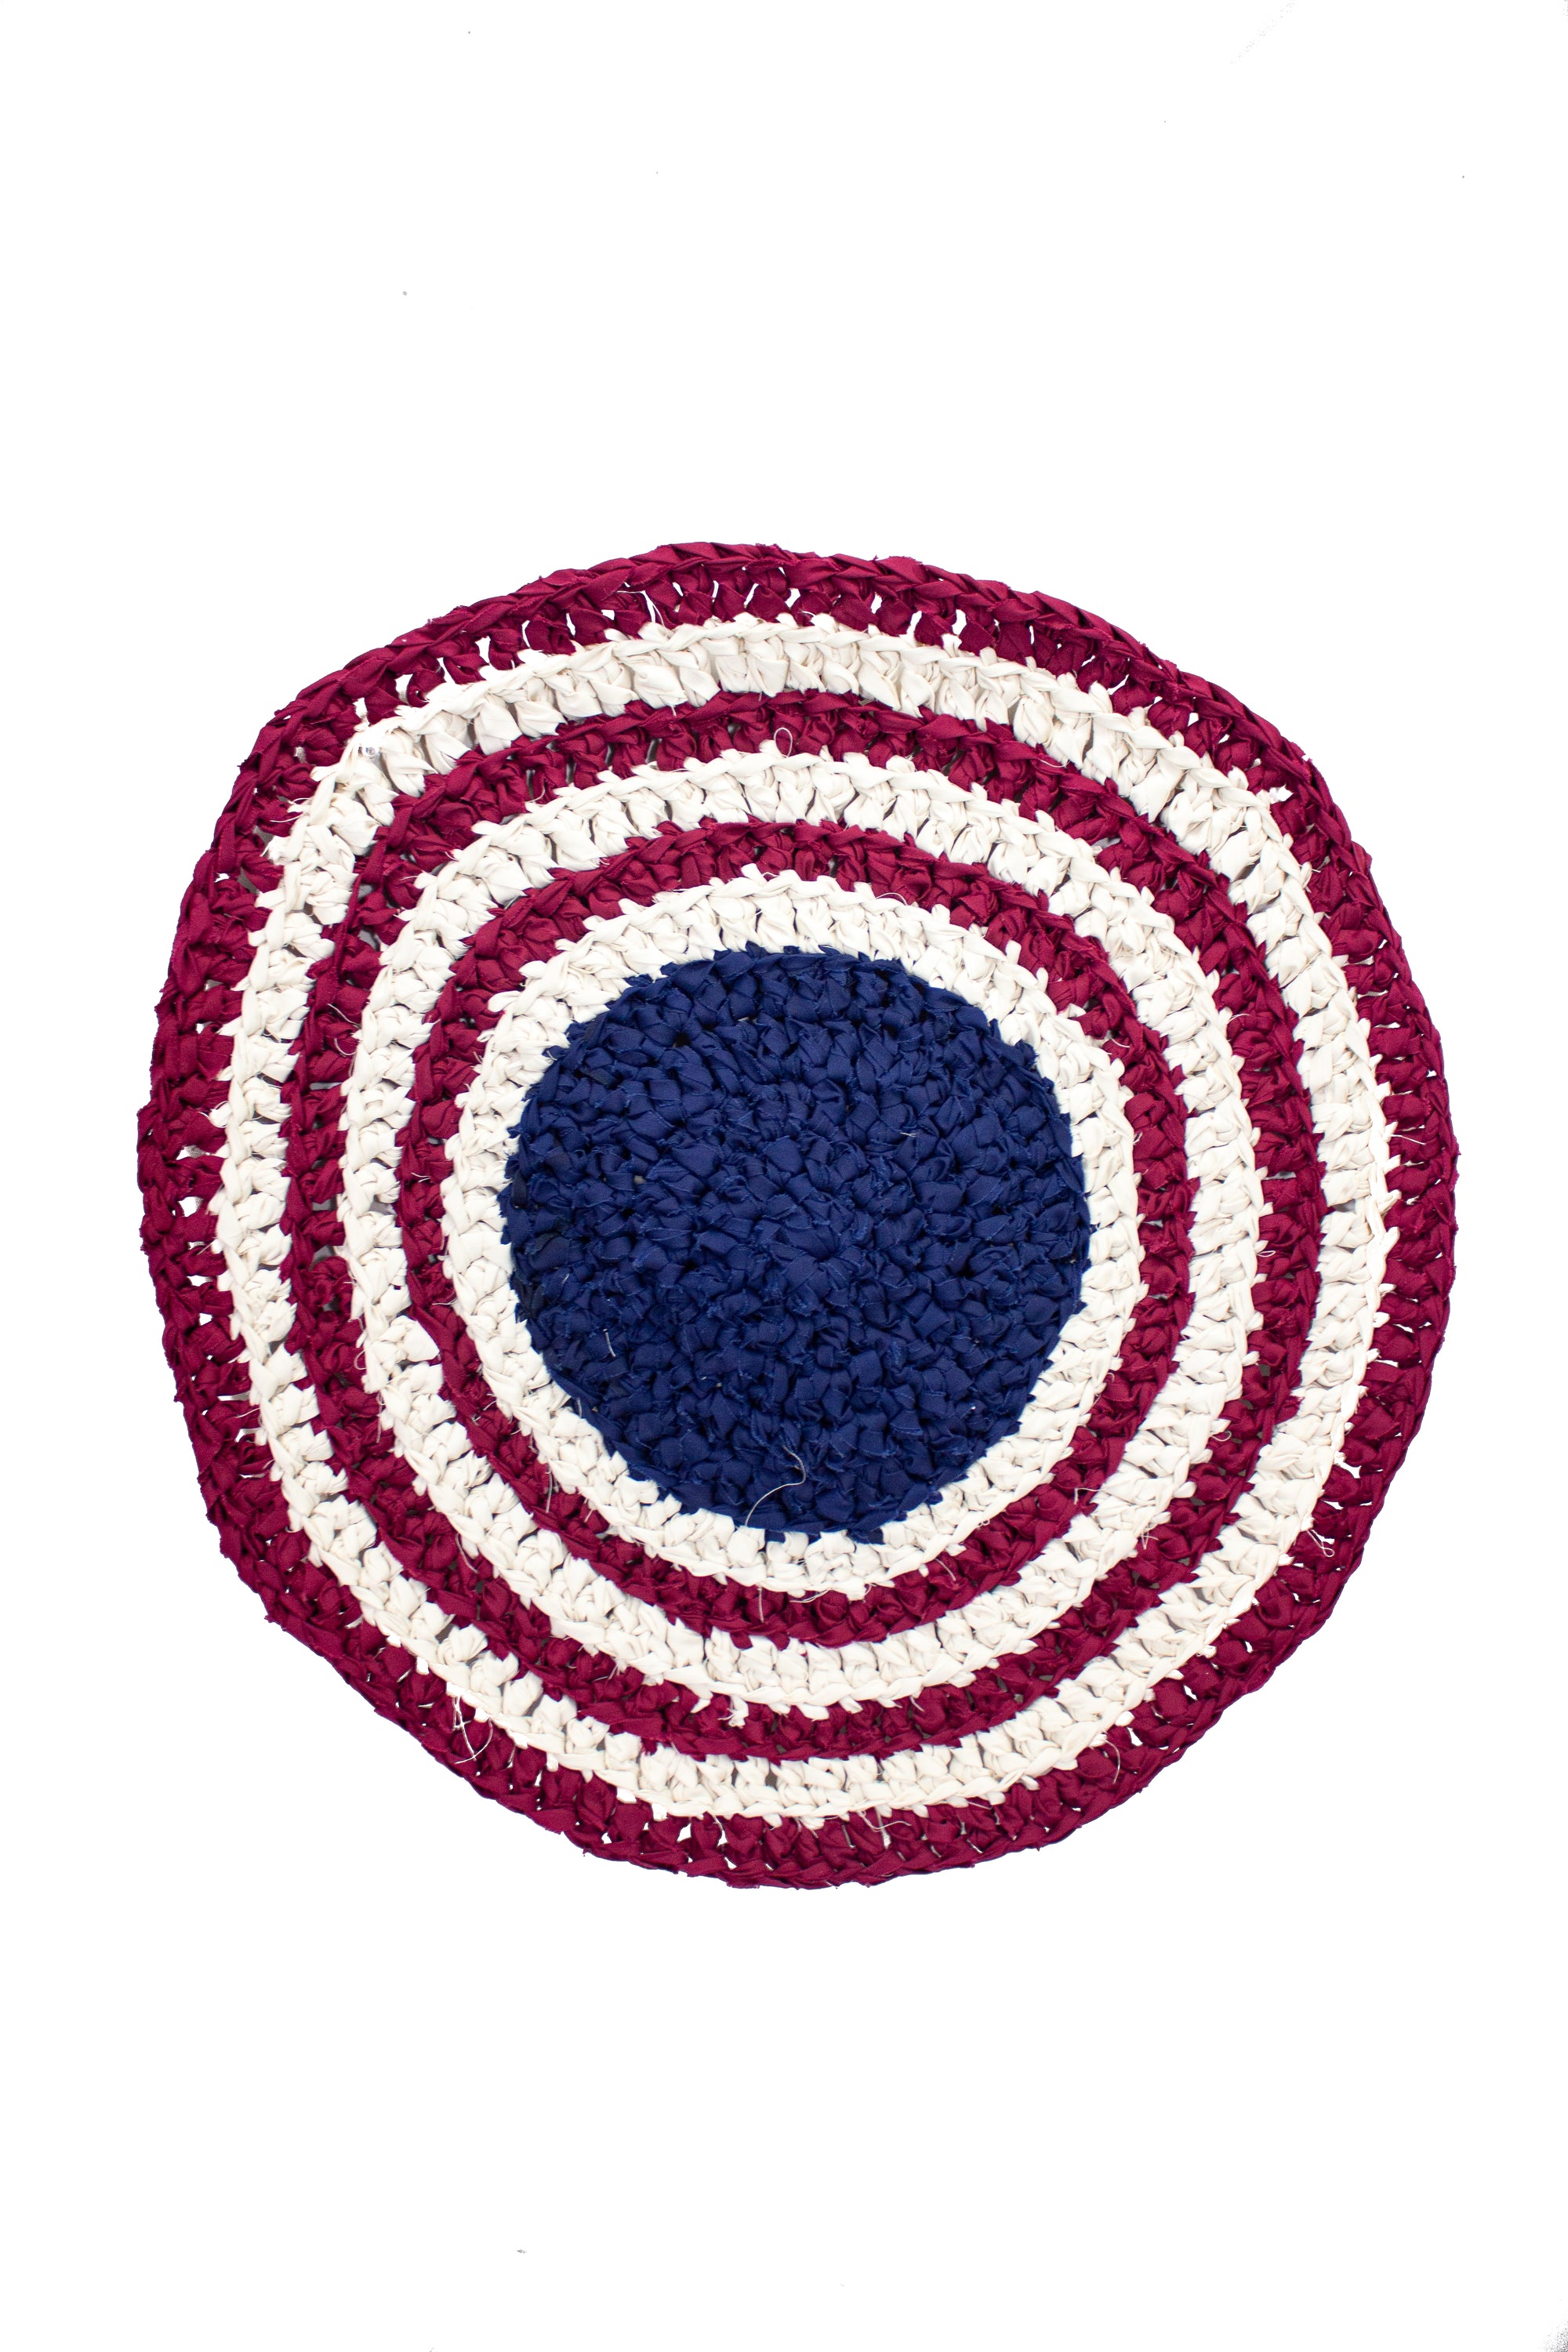 Crocheted Rug-Red, White, and Blue